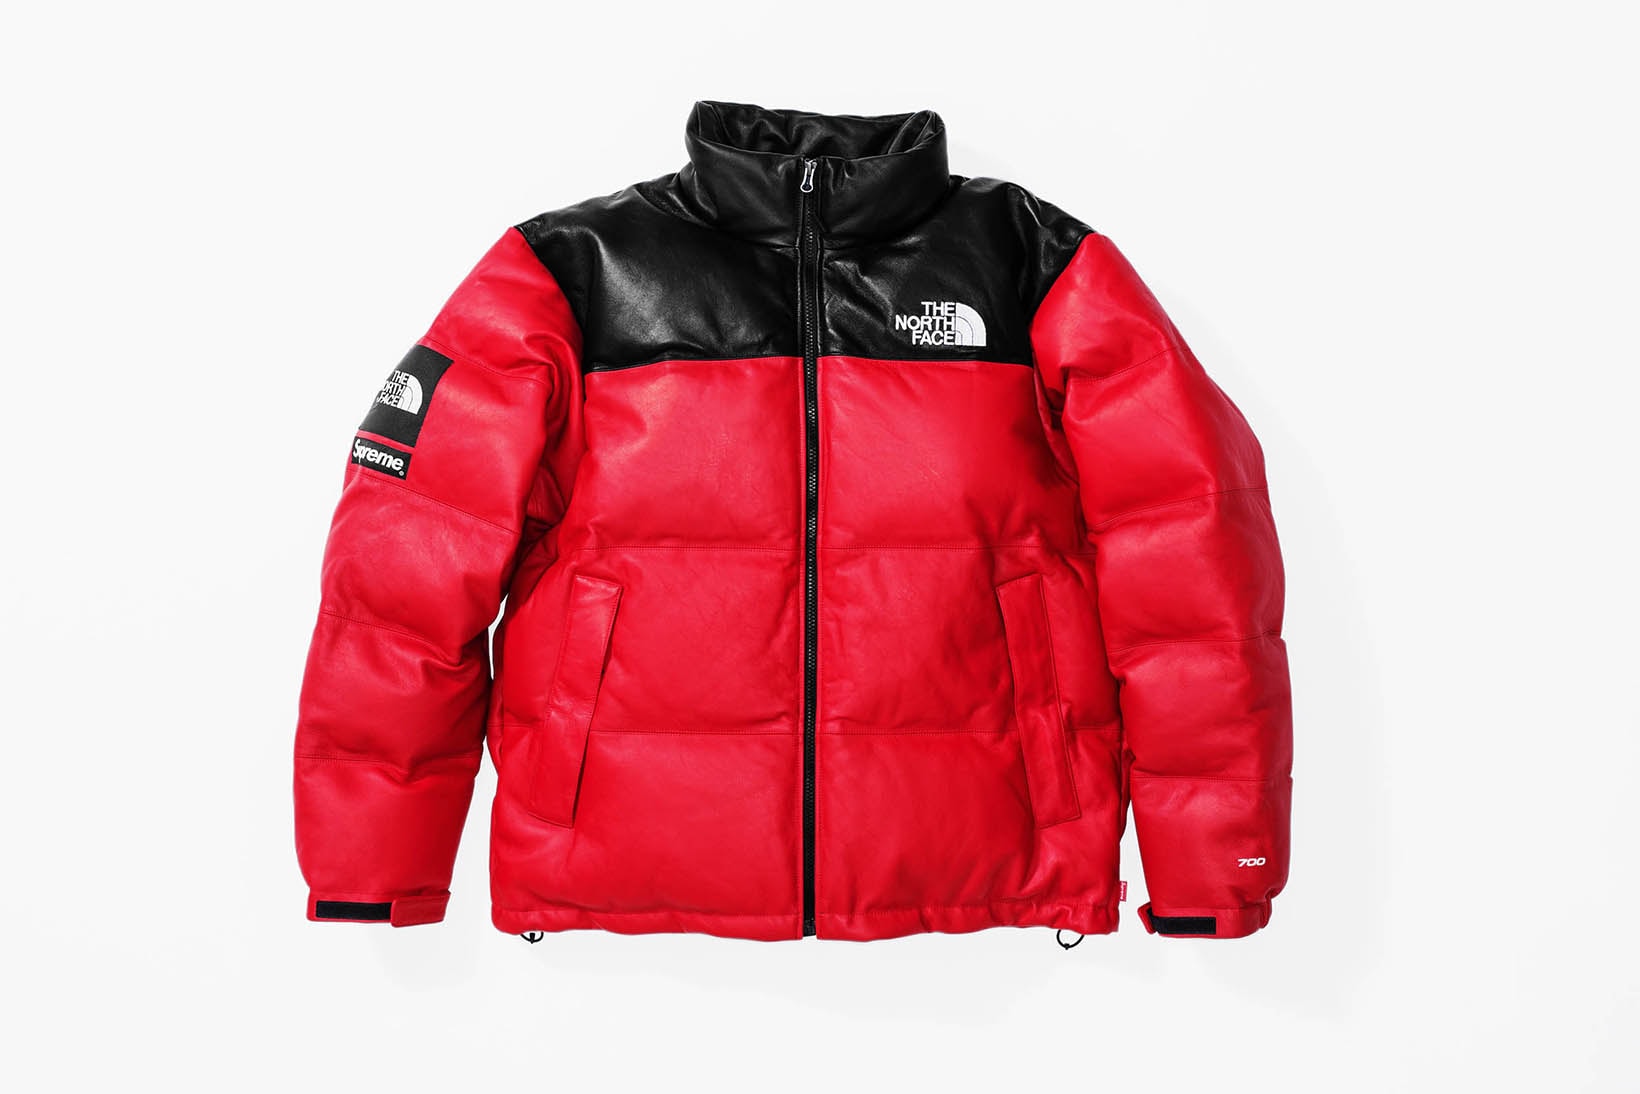 Supreme x The North Face 2017 Fall Red Jacket